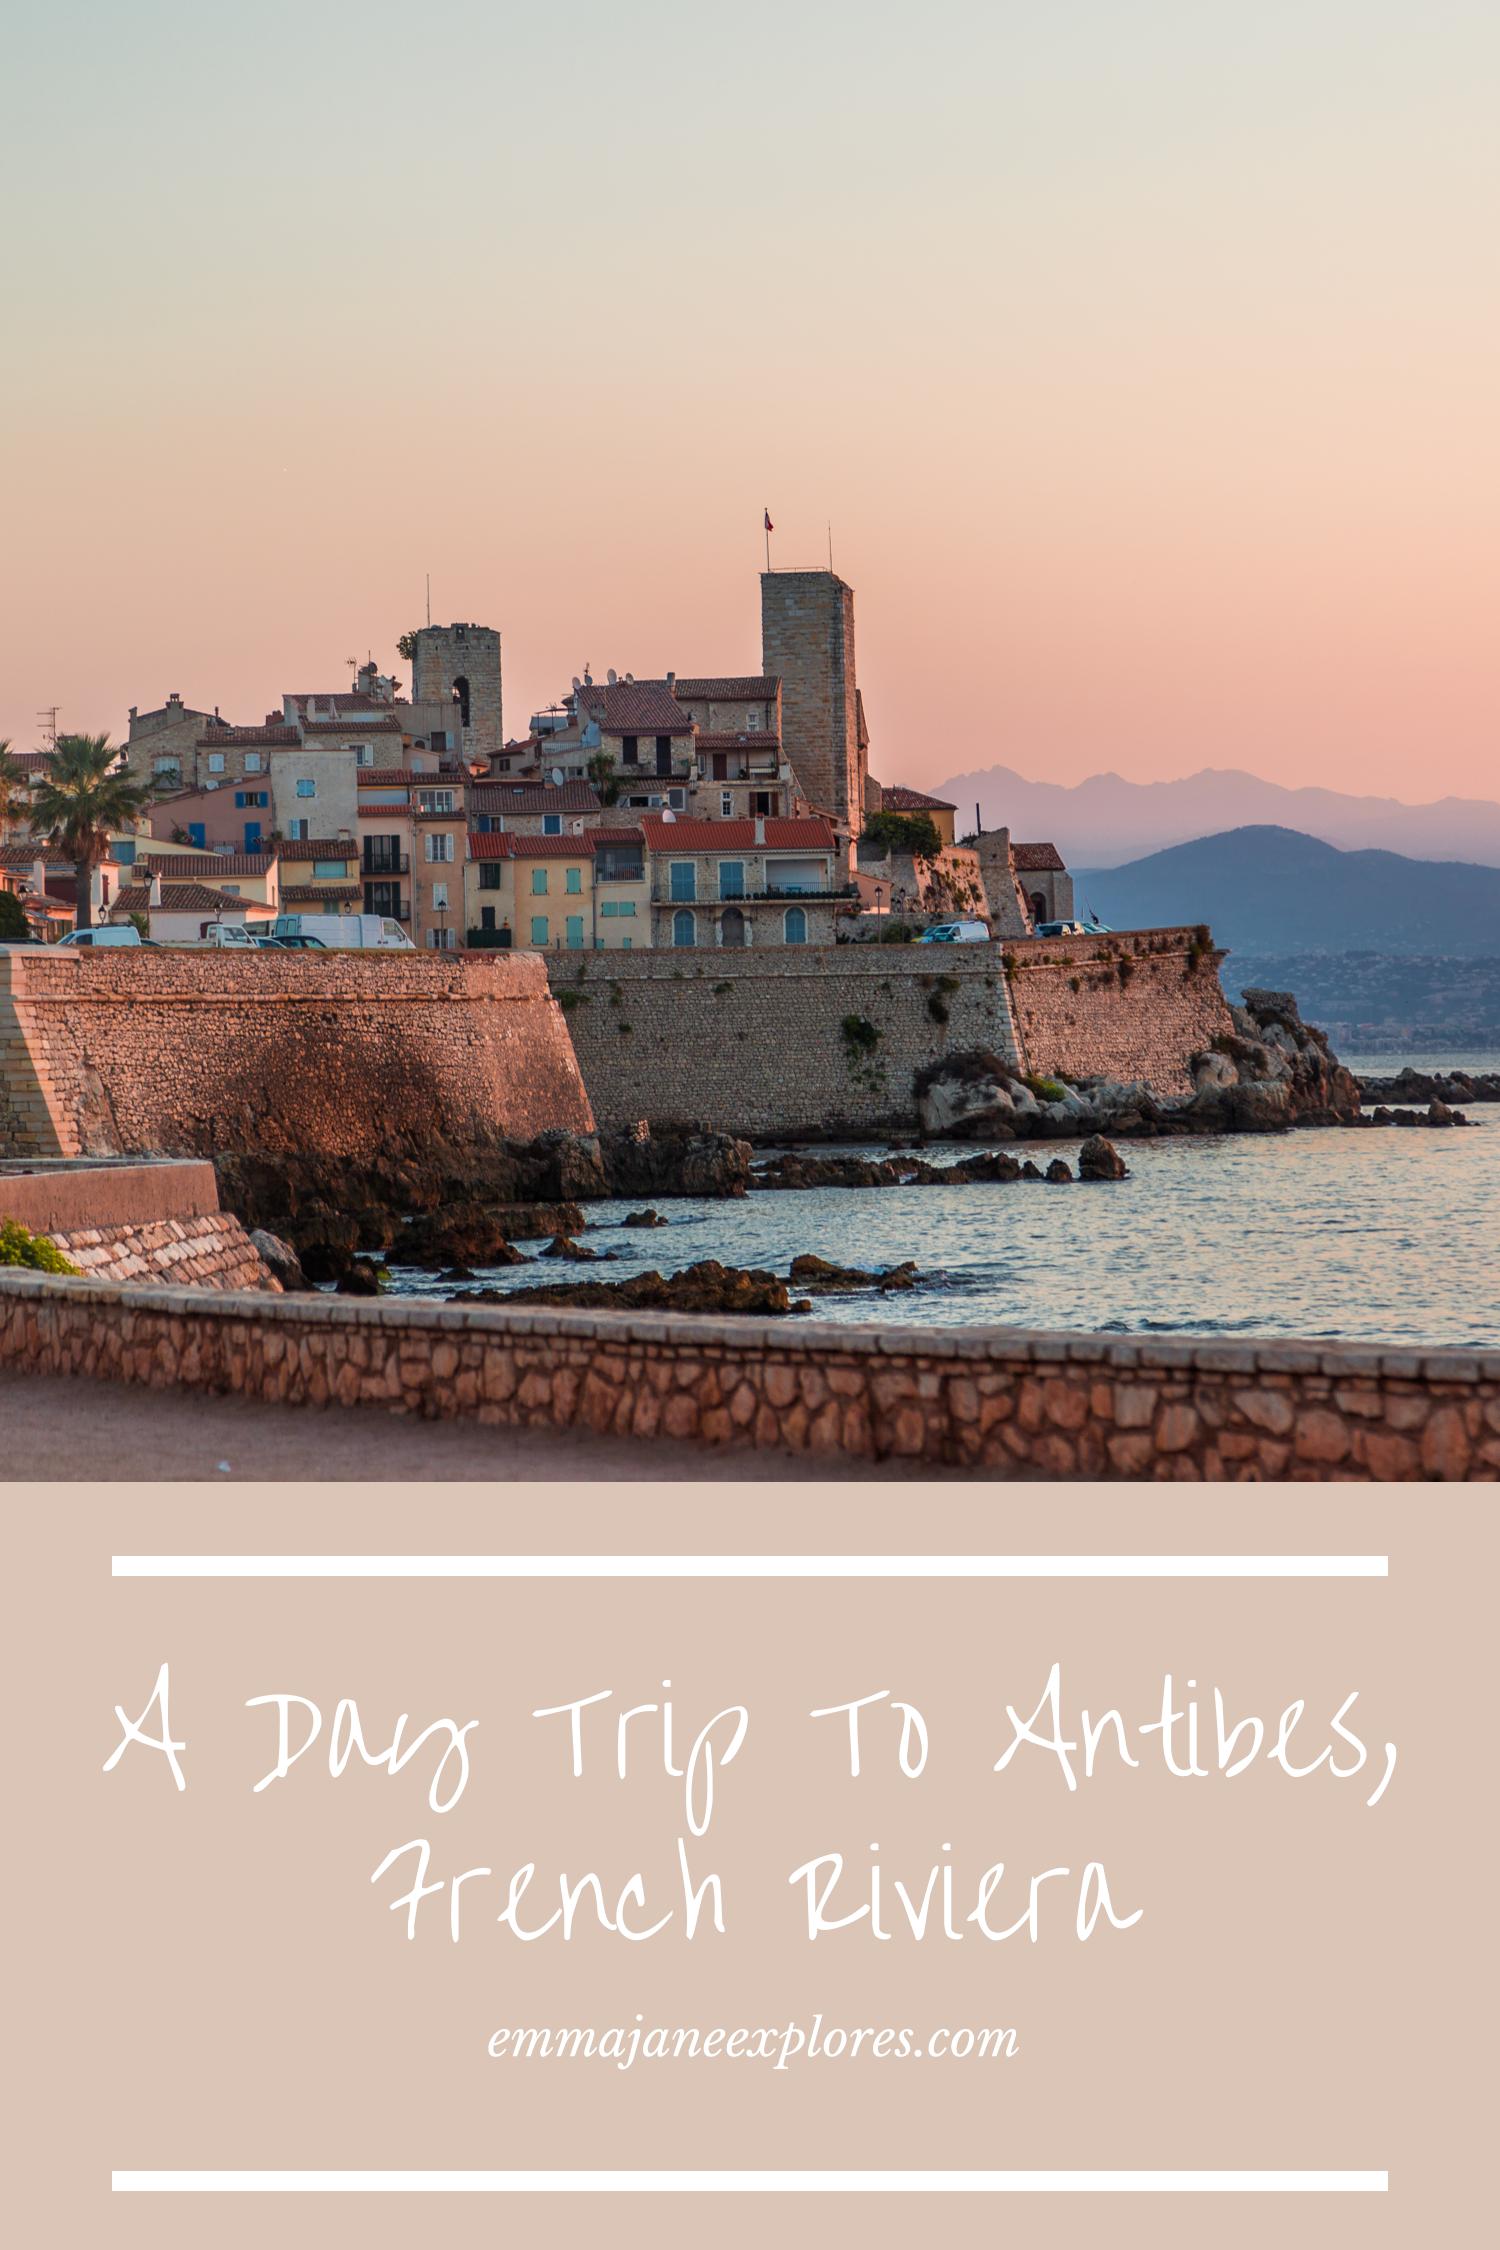 Things to do in Antibes on the French Riviera - Emma Jane Explores